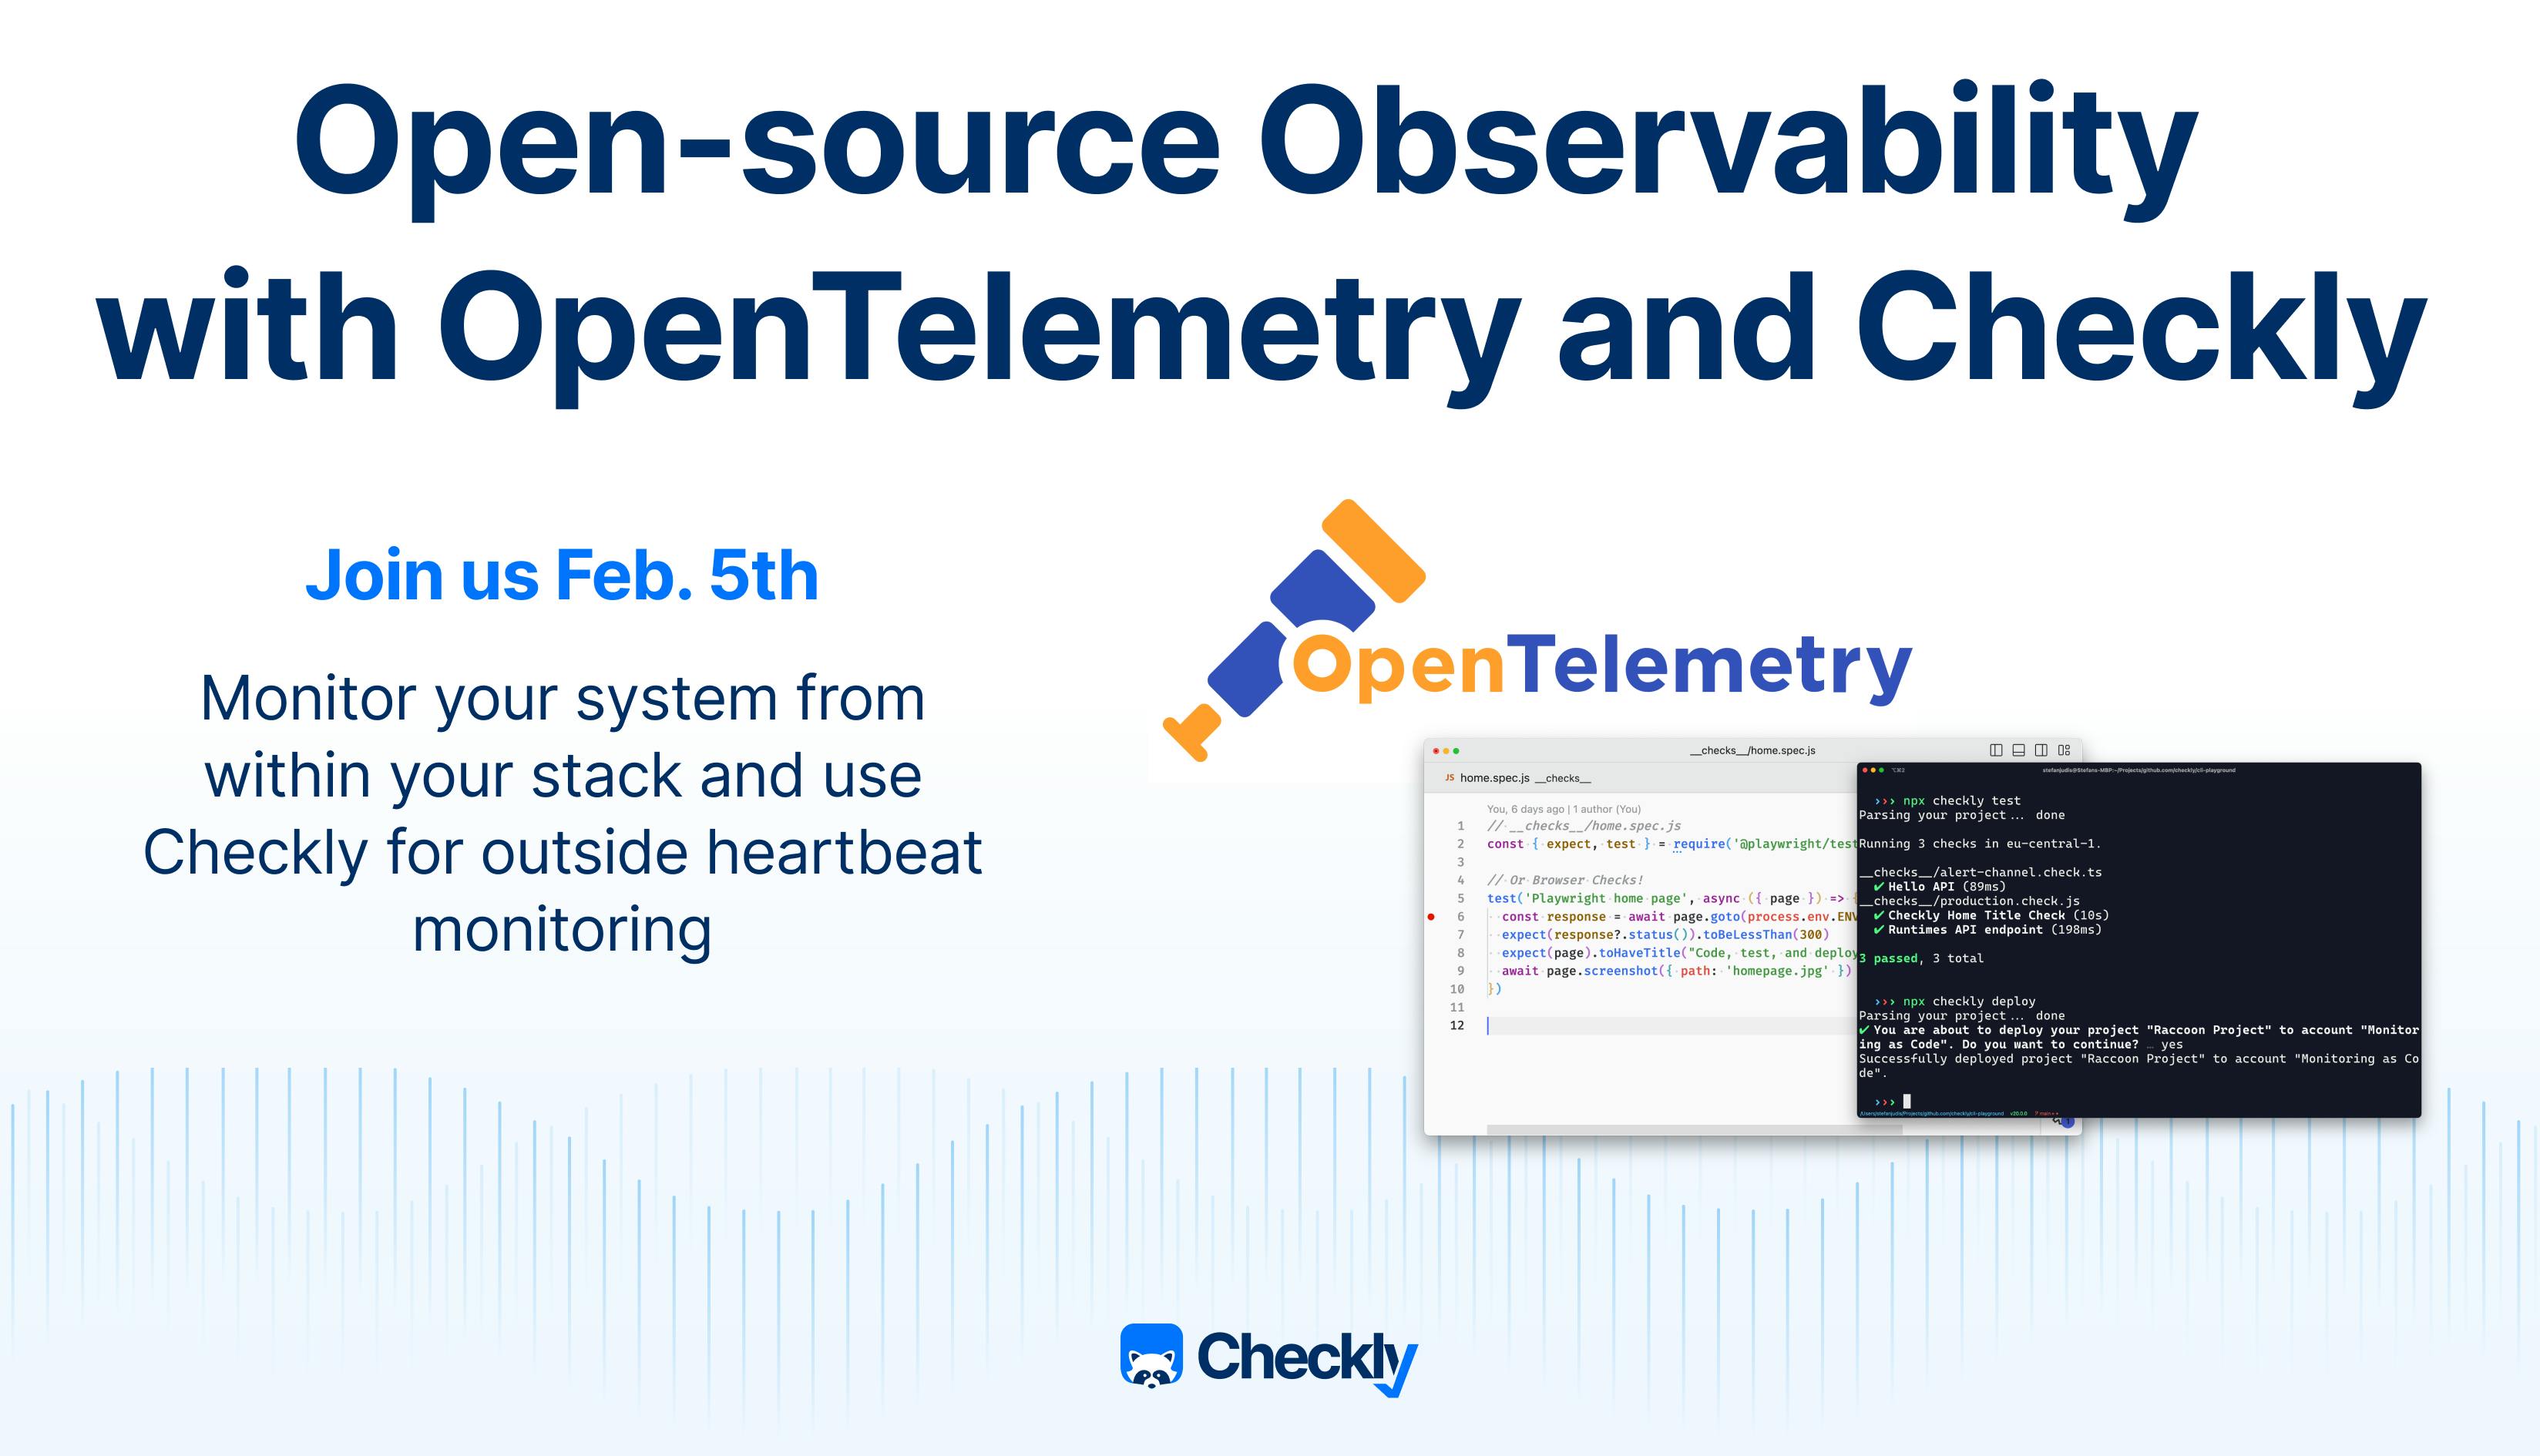 Title card showing Open-source Observability 
with OpenTelemetry and Checkly With the subtitle:

Monitor your system from within your stack and use Checkly for outside heartbeat monitoring